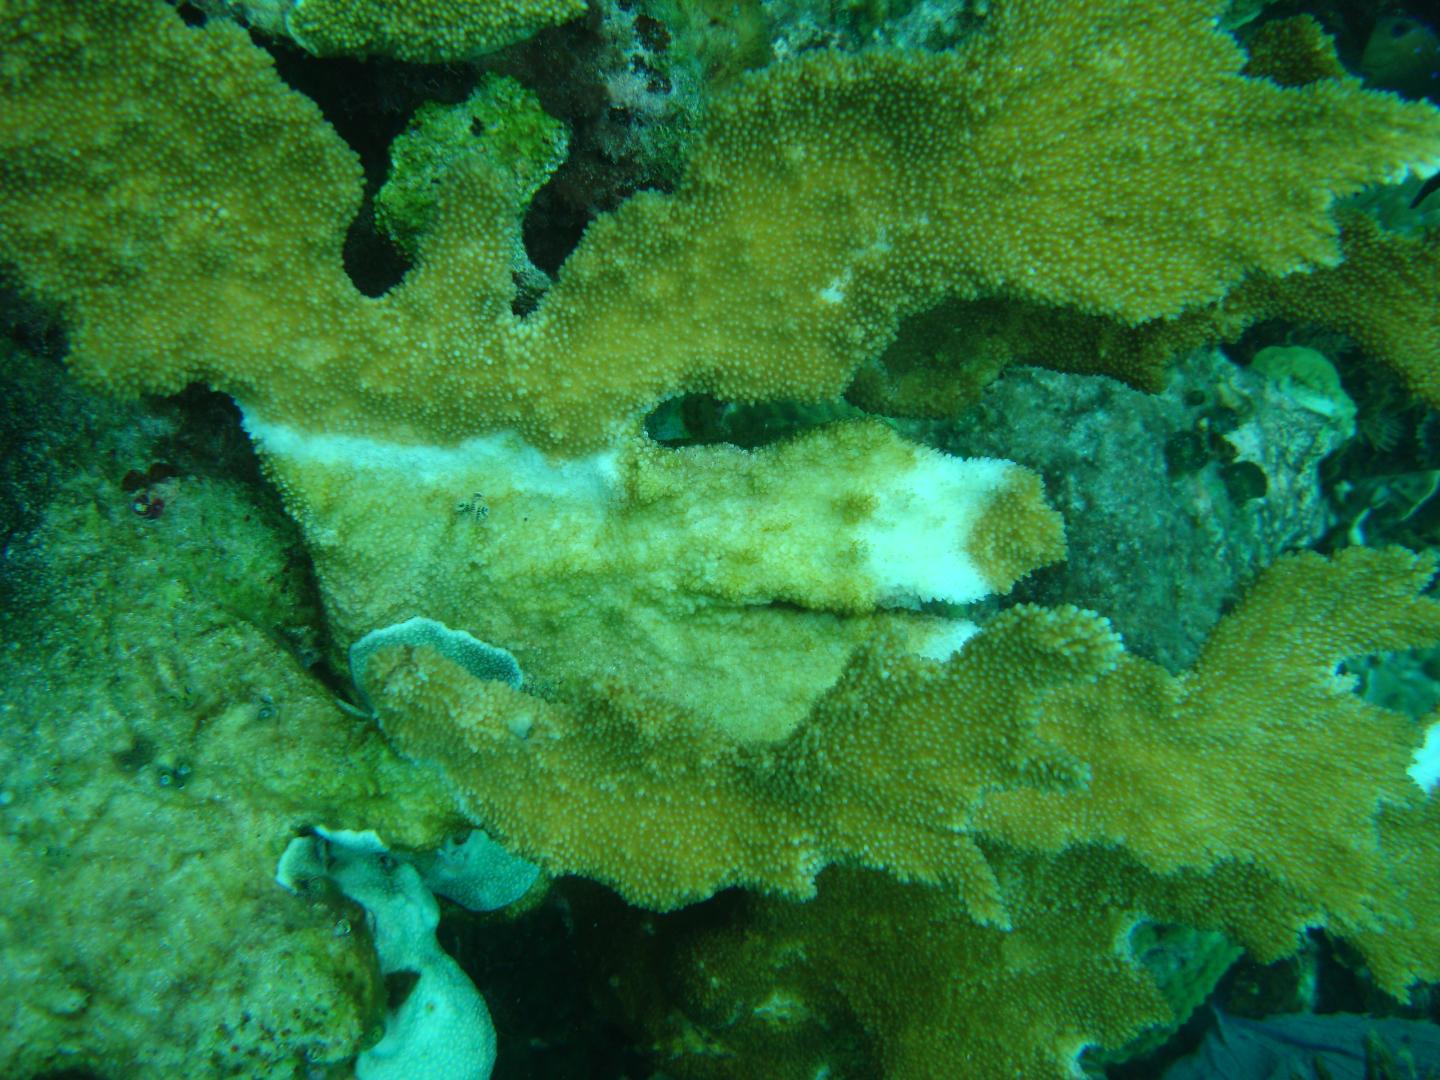 White-Band Disease in Coral